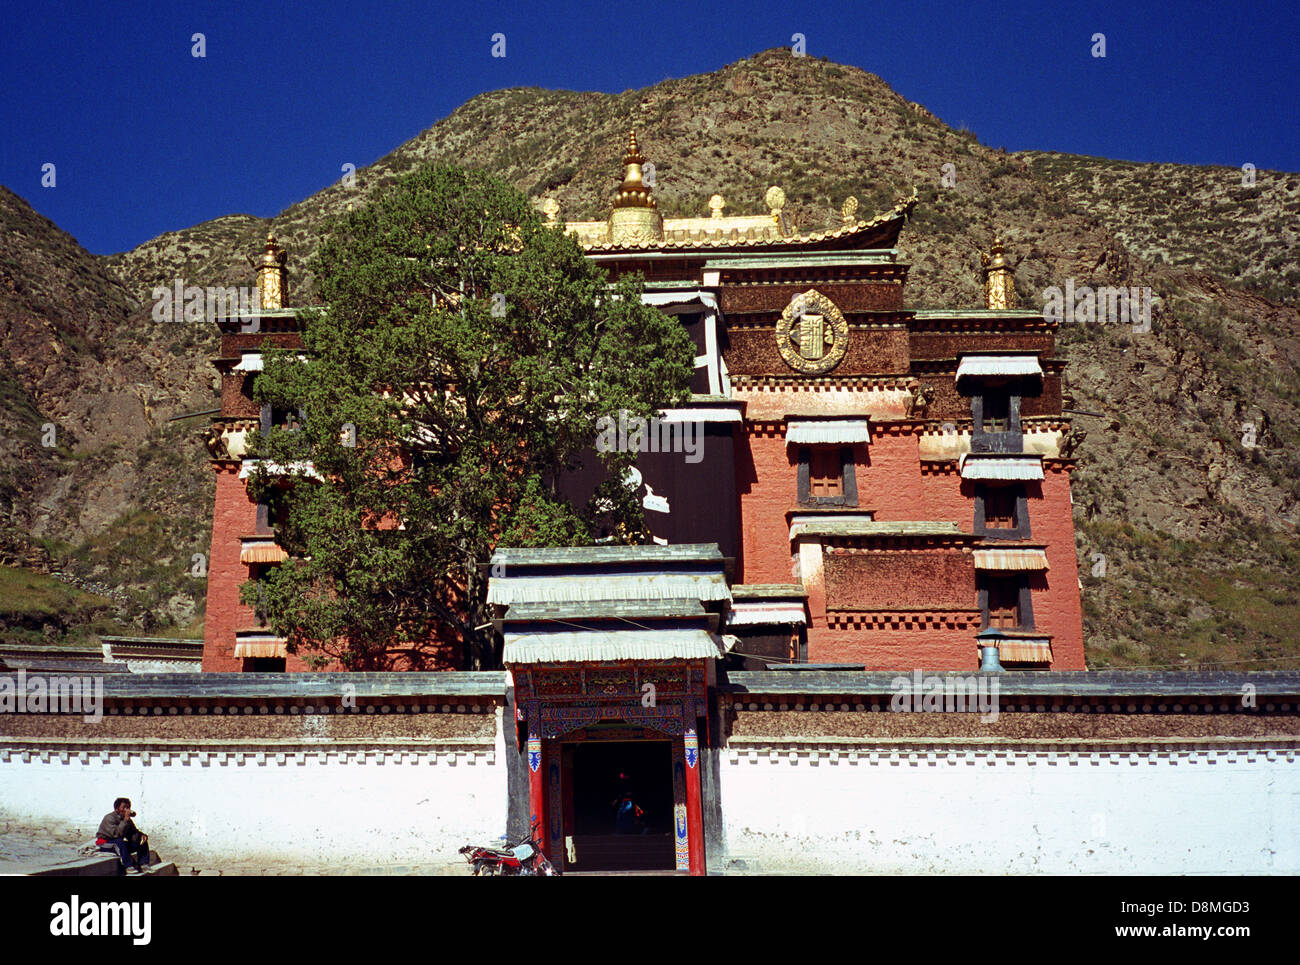 View of the Labuleng Si or Labrang monastery one of the six great monasteries of the Gelug school of Tibetan Buddhism located at the foot of the Phoenix Mountain northwest of Xiahe County in Gannan Tibetan Nationality Autonomous Prefecture, Gansu Province China Stock Photo